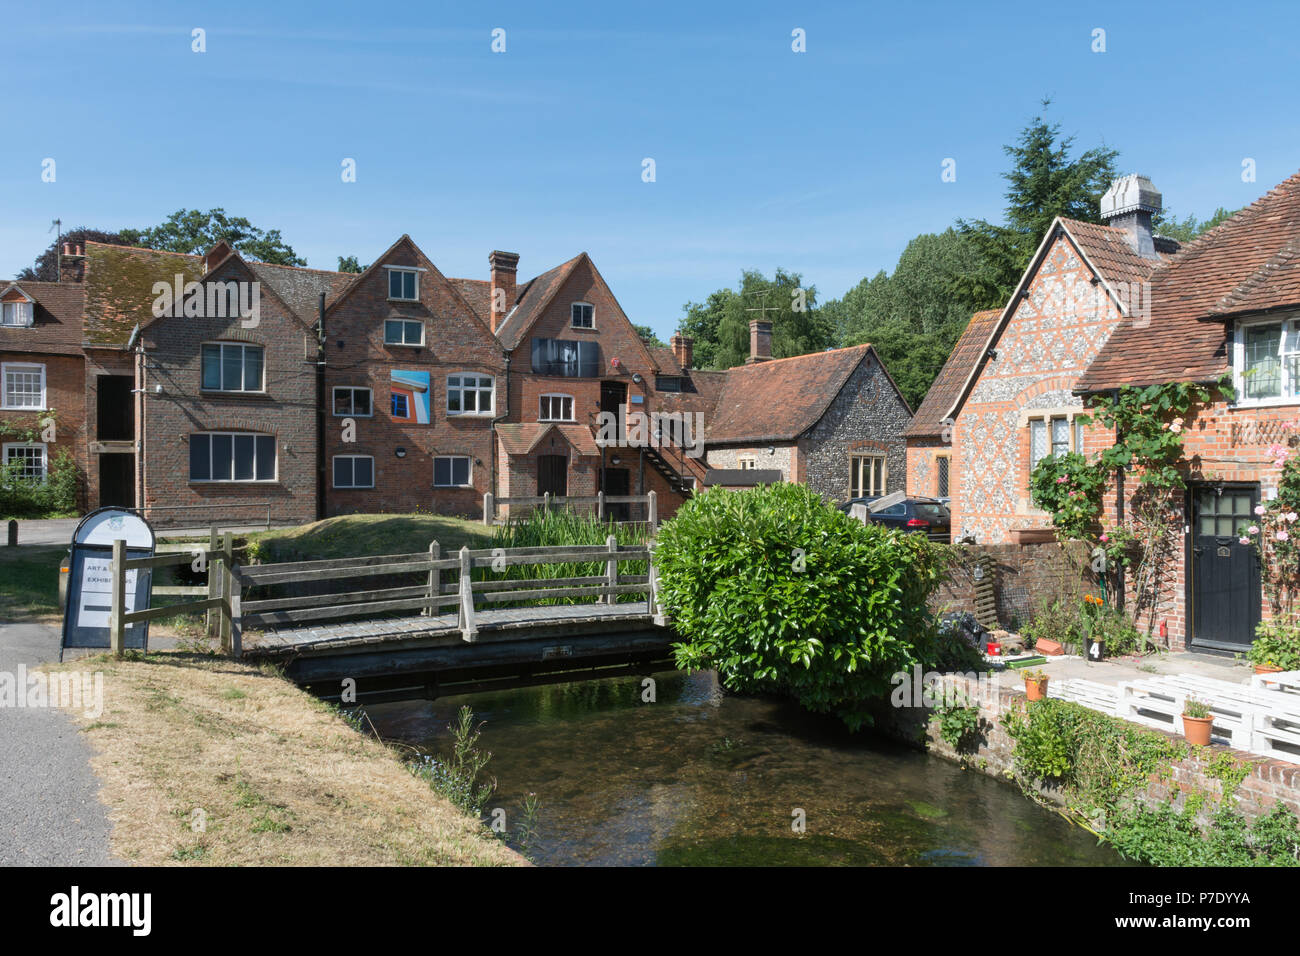 Riverside cottages in the pretty West Berkshire village of Bradfield, UK, on a sunny summer day Stock Photo